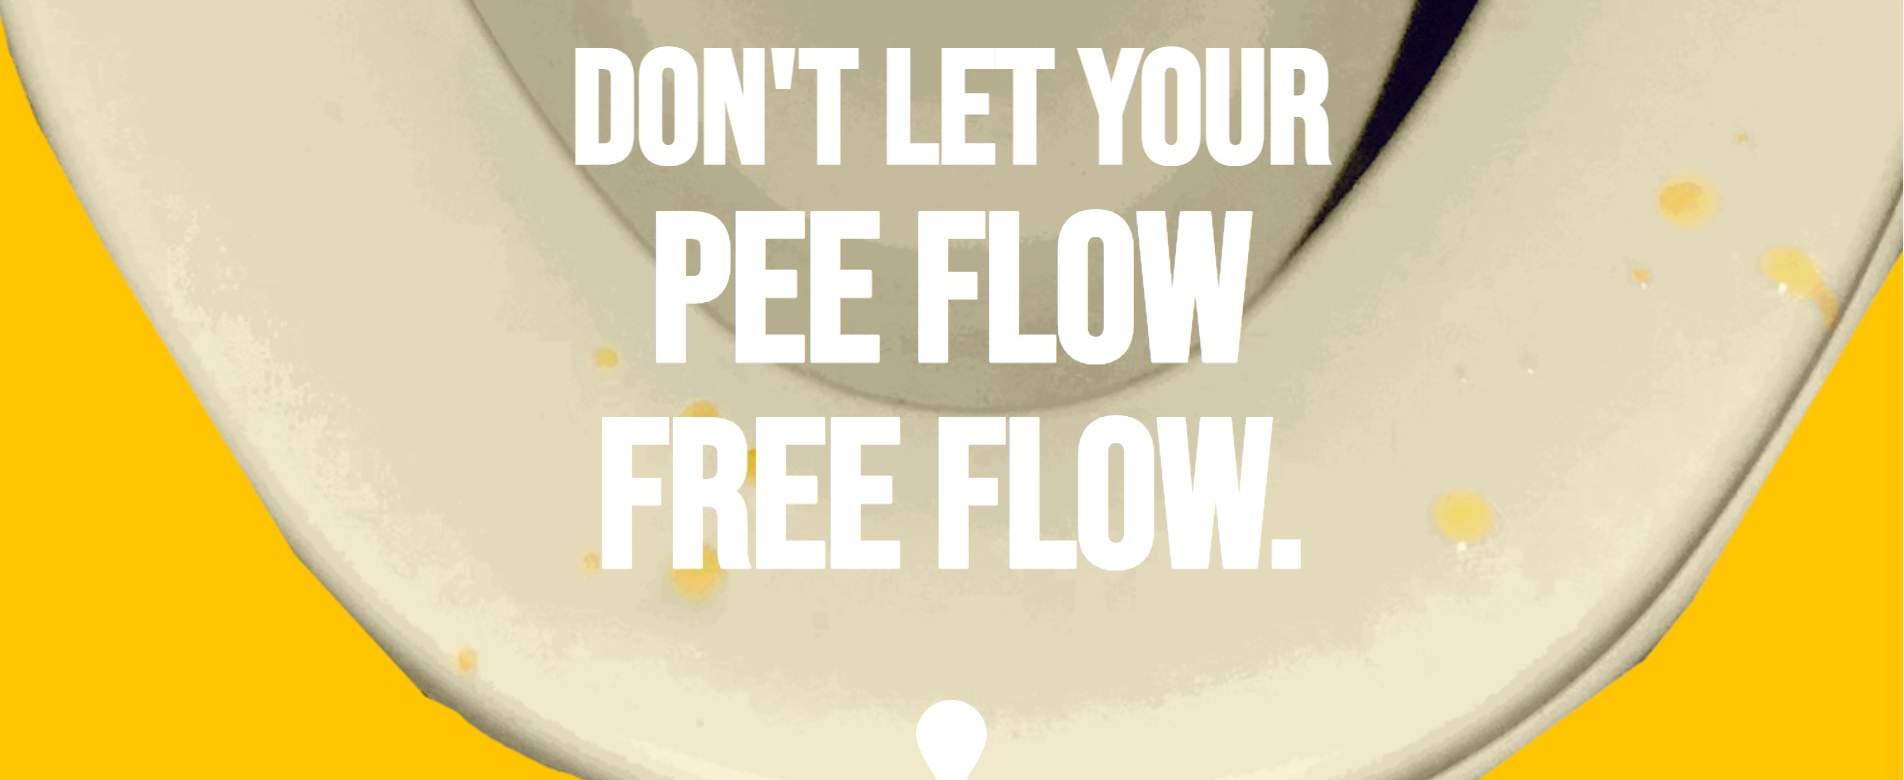 bold white text 'Don't Let Your Pee Flow, Free Flow' over image
          of toilet seat with pee droplets